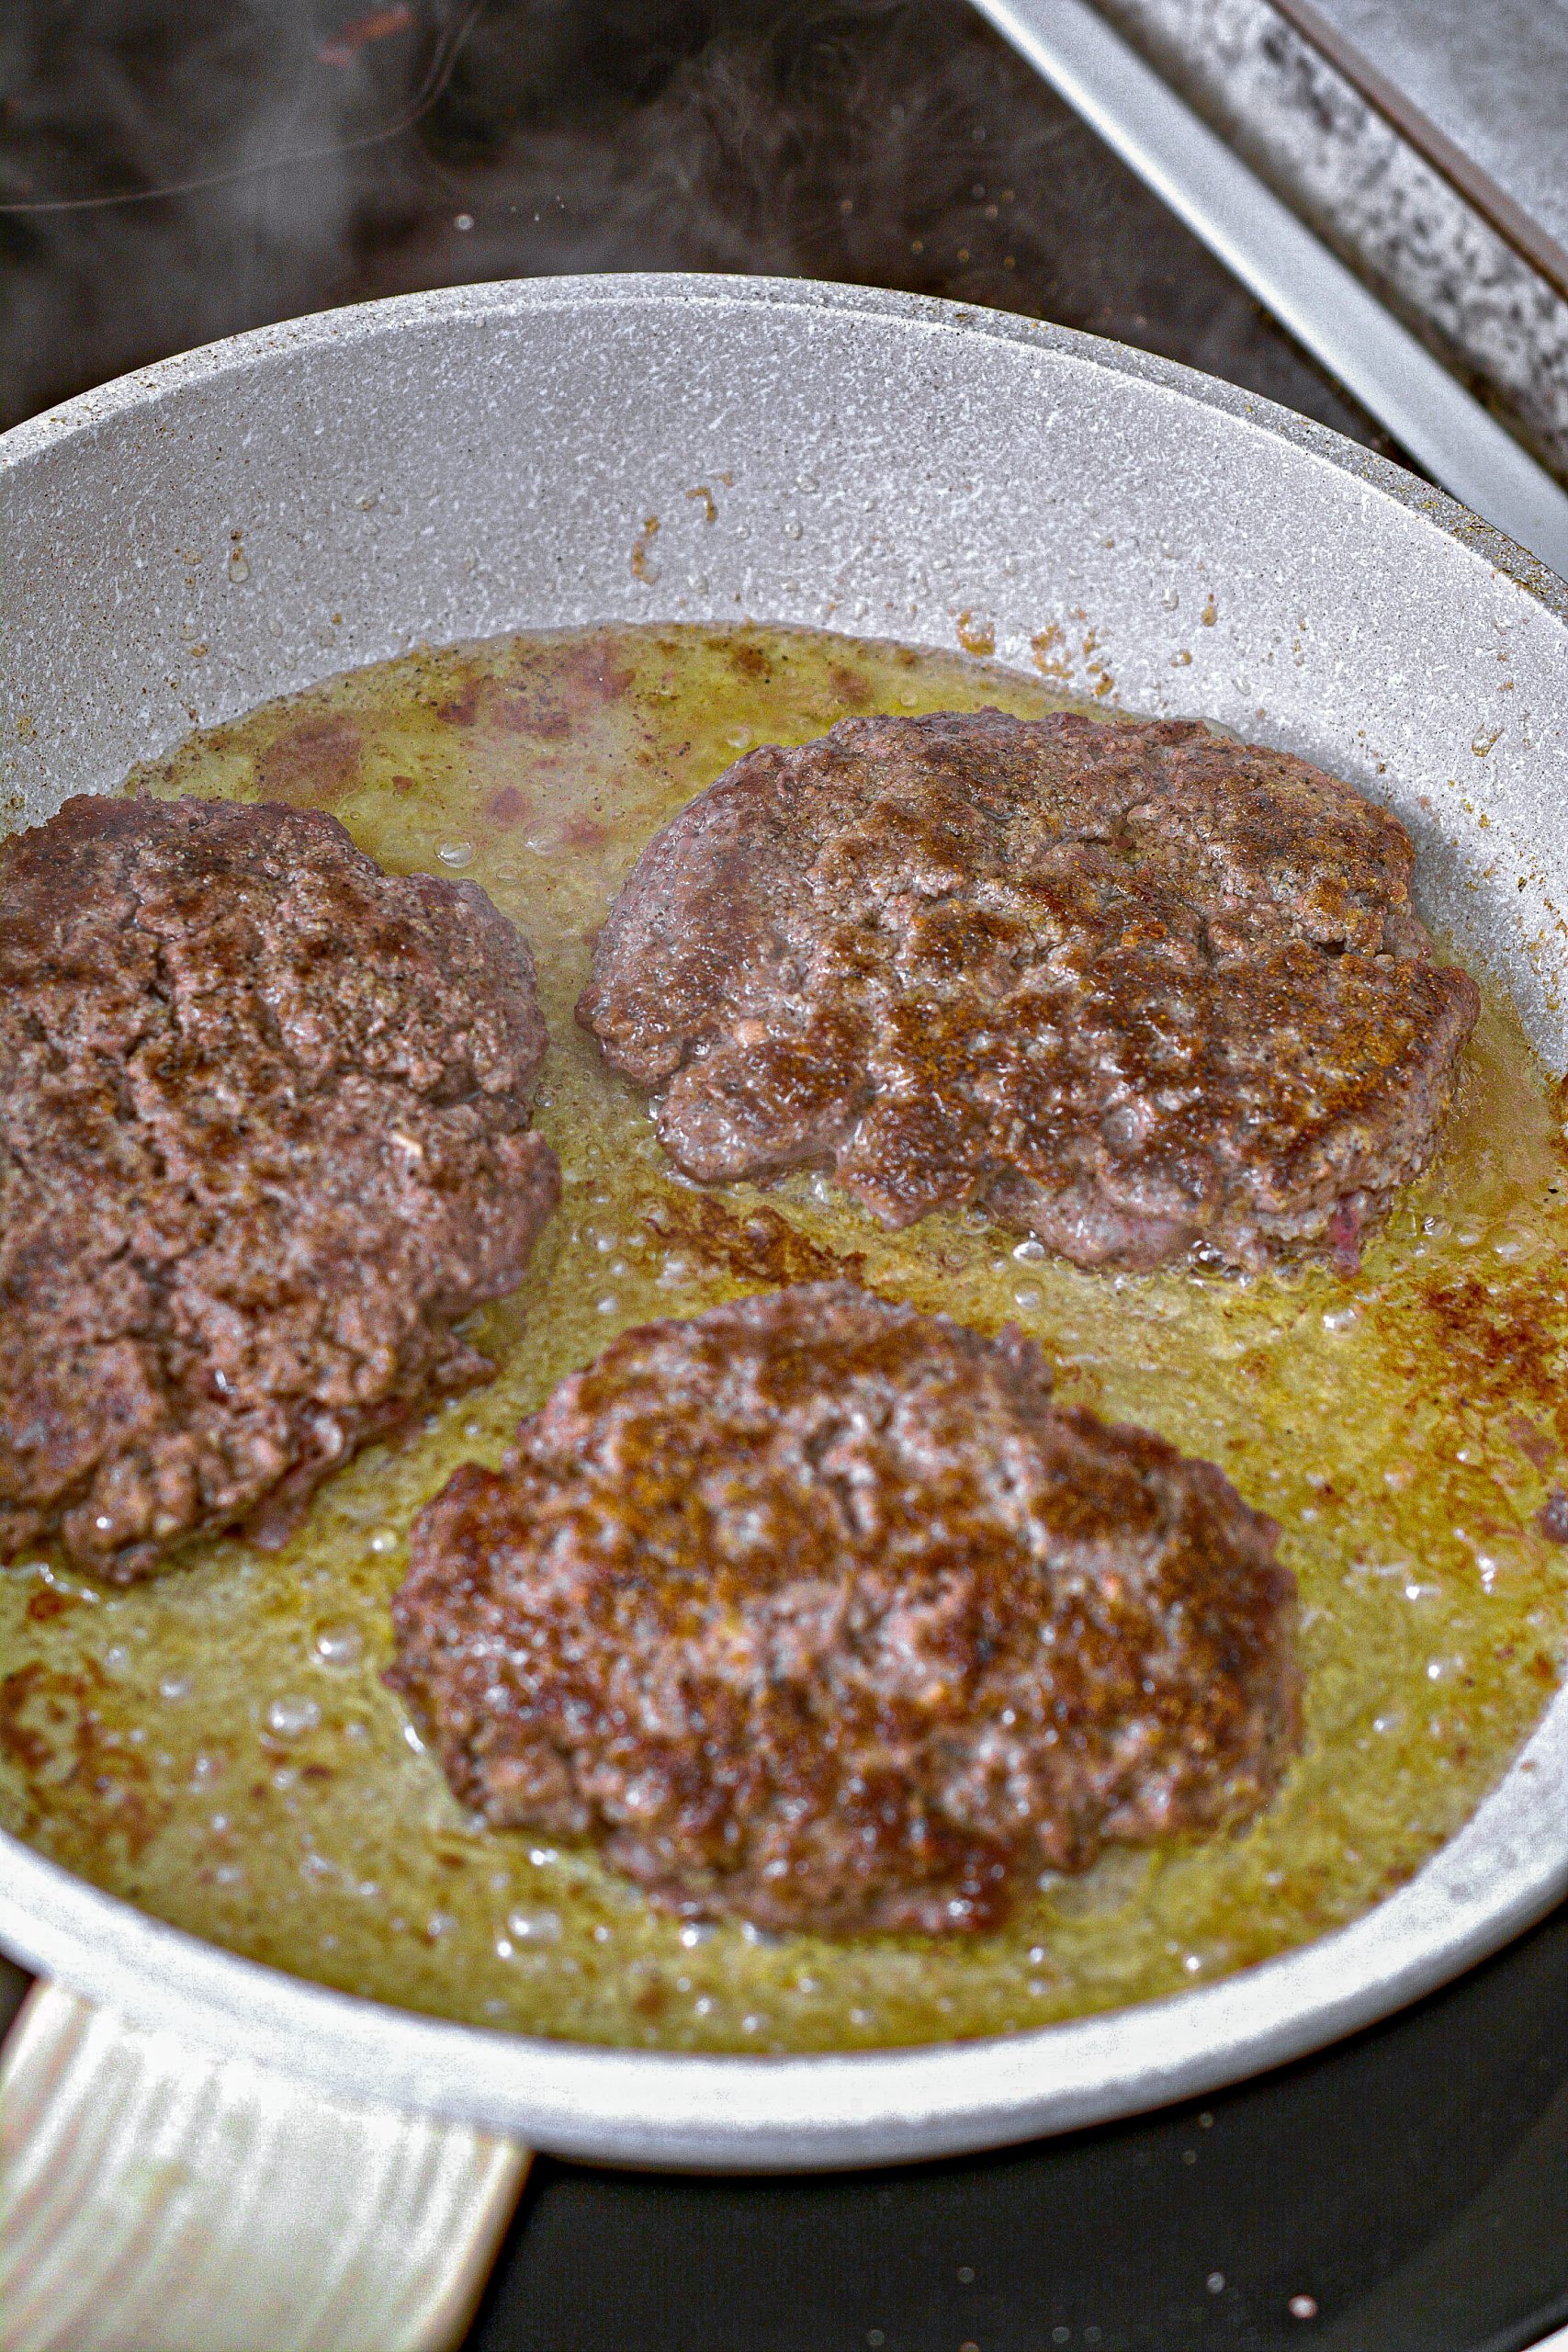 Cook the patties over medium-high heat on the stove until cooked through. Remove from the pan.